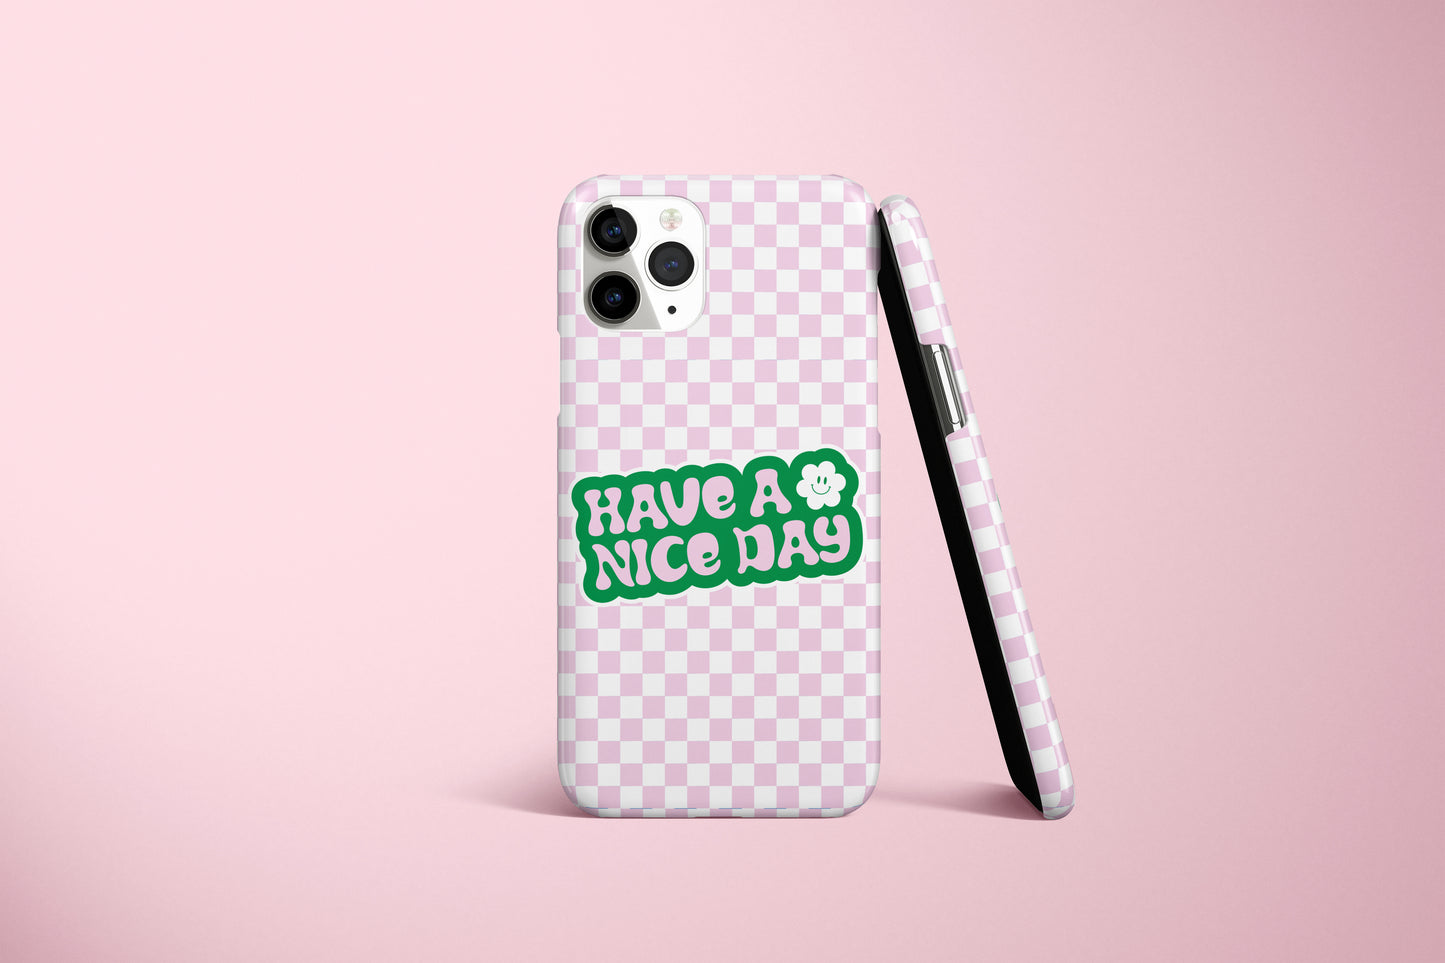 Have A Nice Day Tough Phone Case